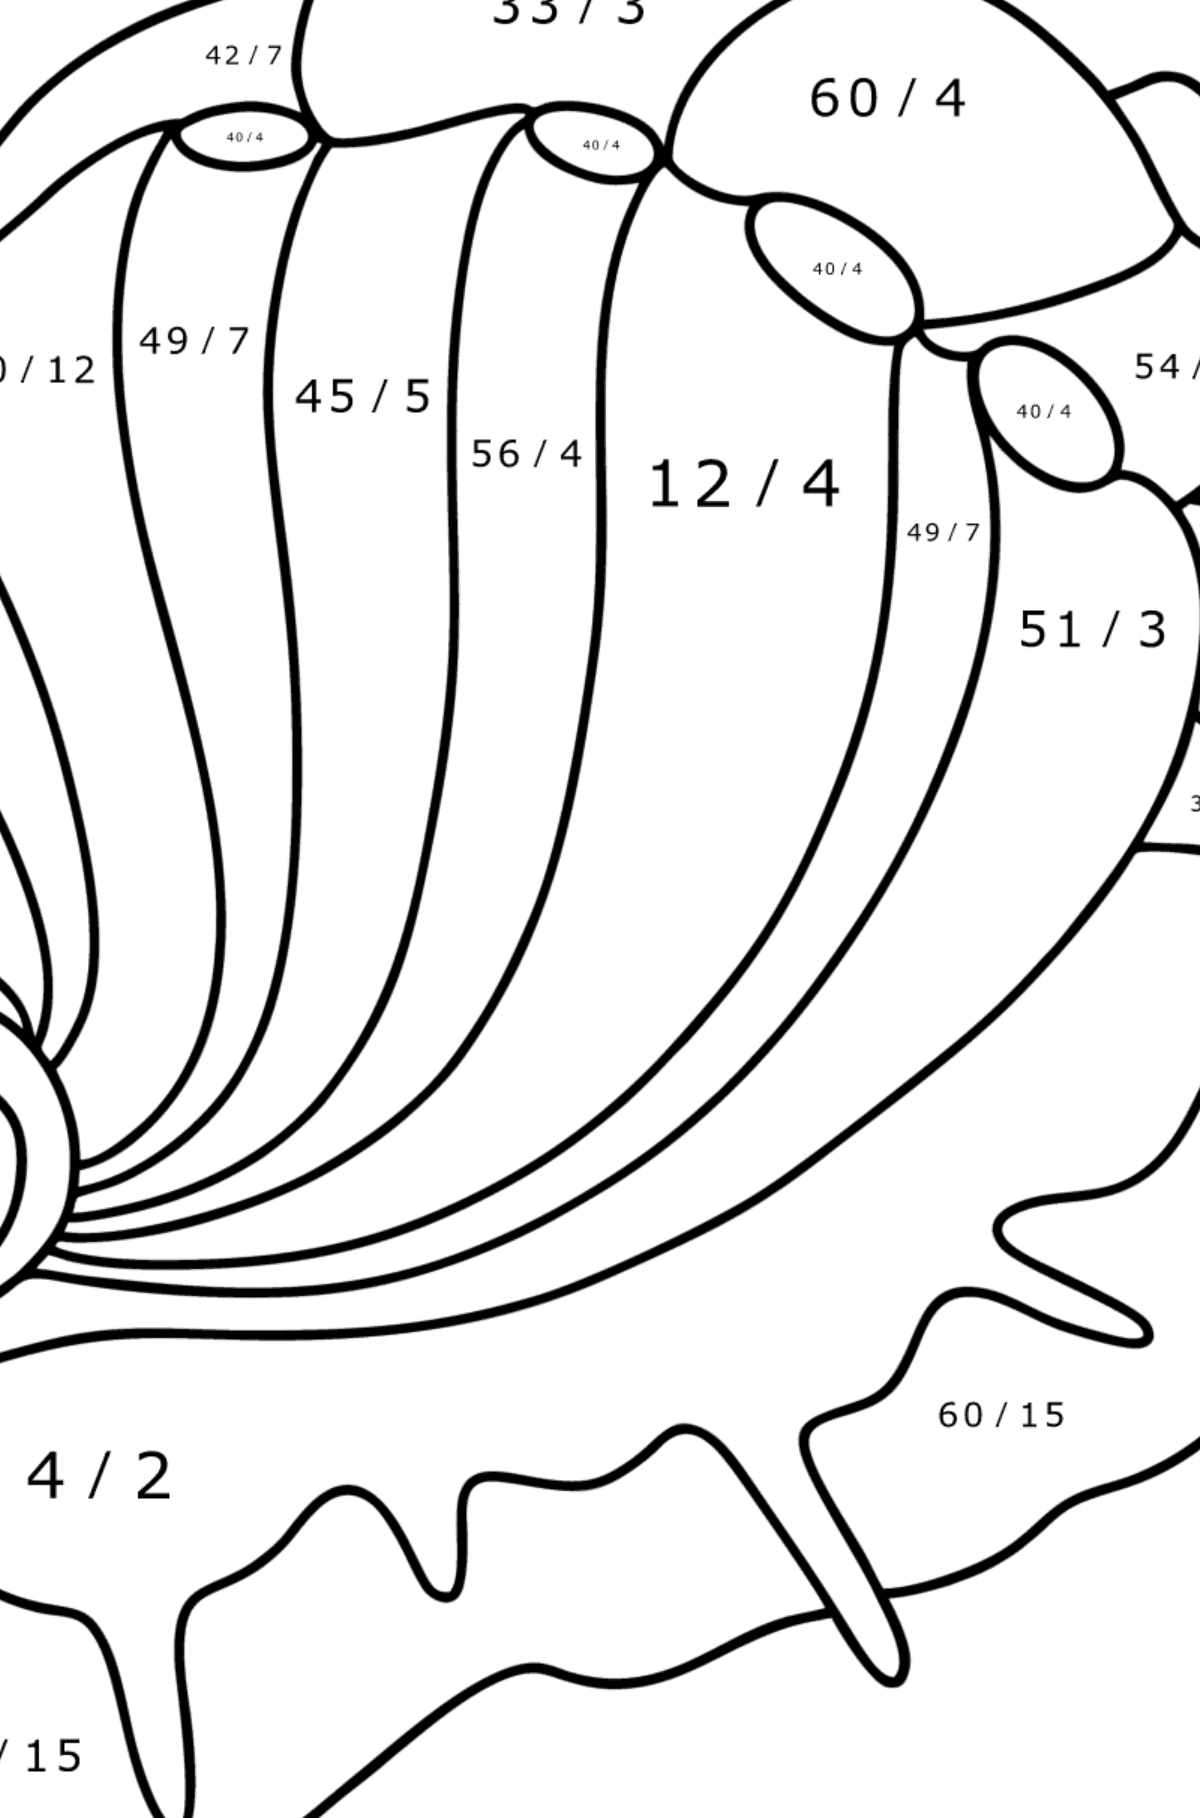 Mollusk abalone coloring page - Math Coloring - Division for Kids